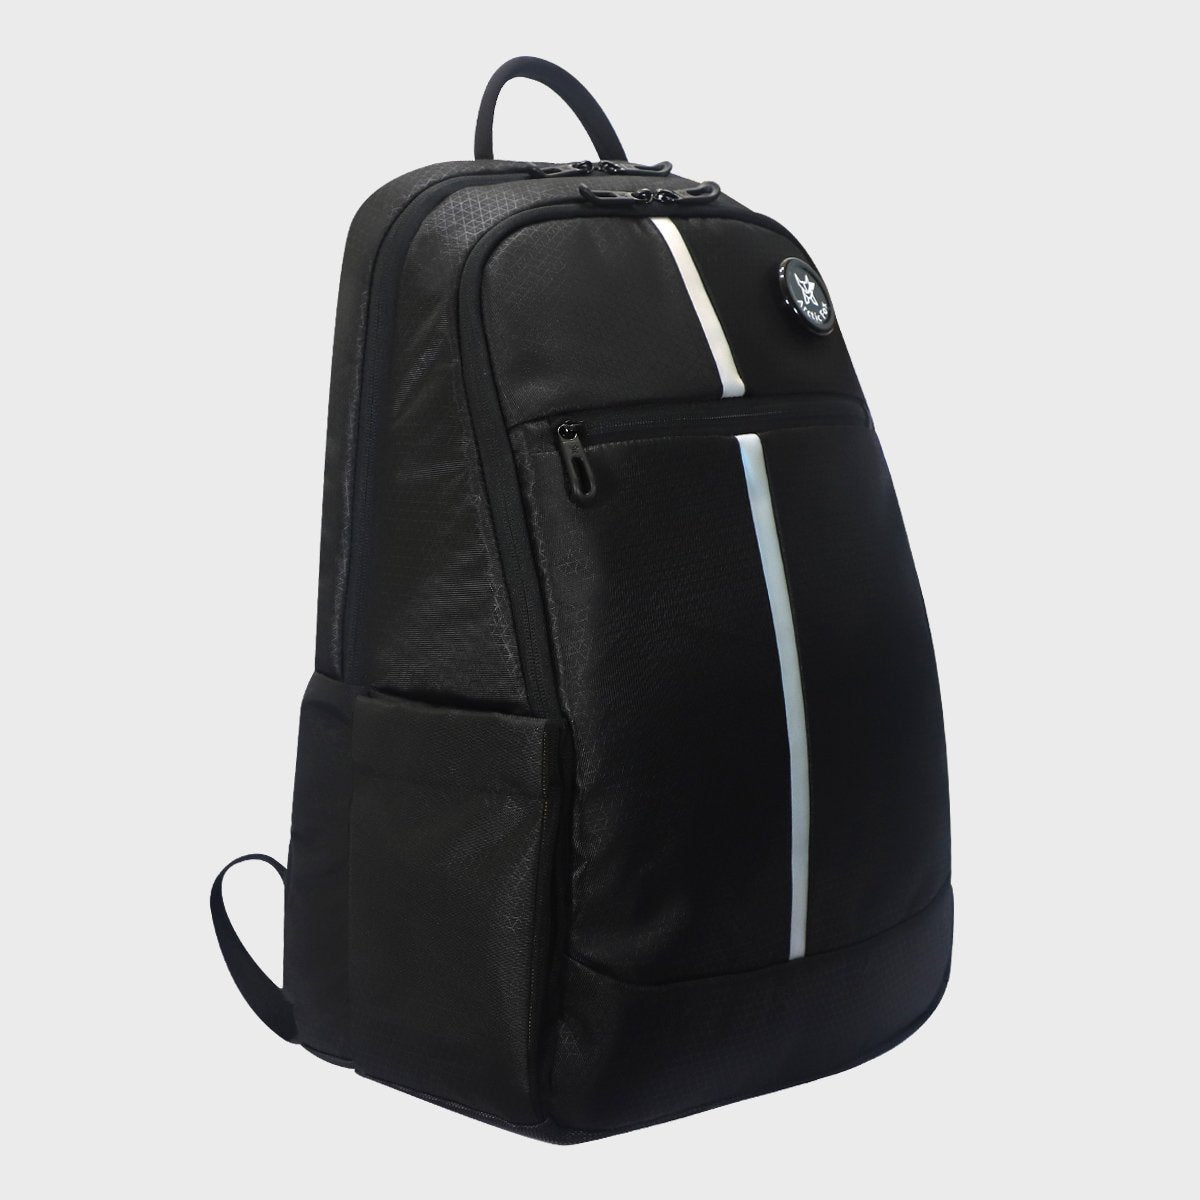 Arctic Fox Chrome Black Laptop bag and Backpack - side